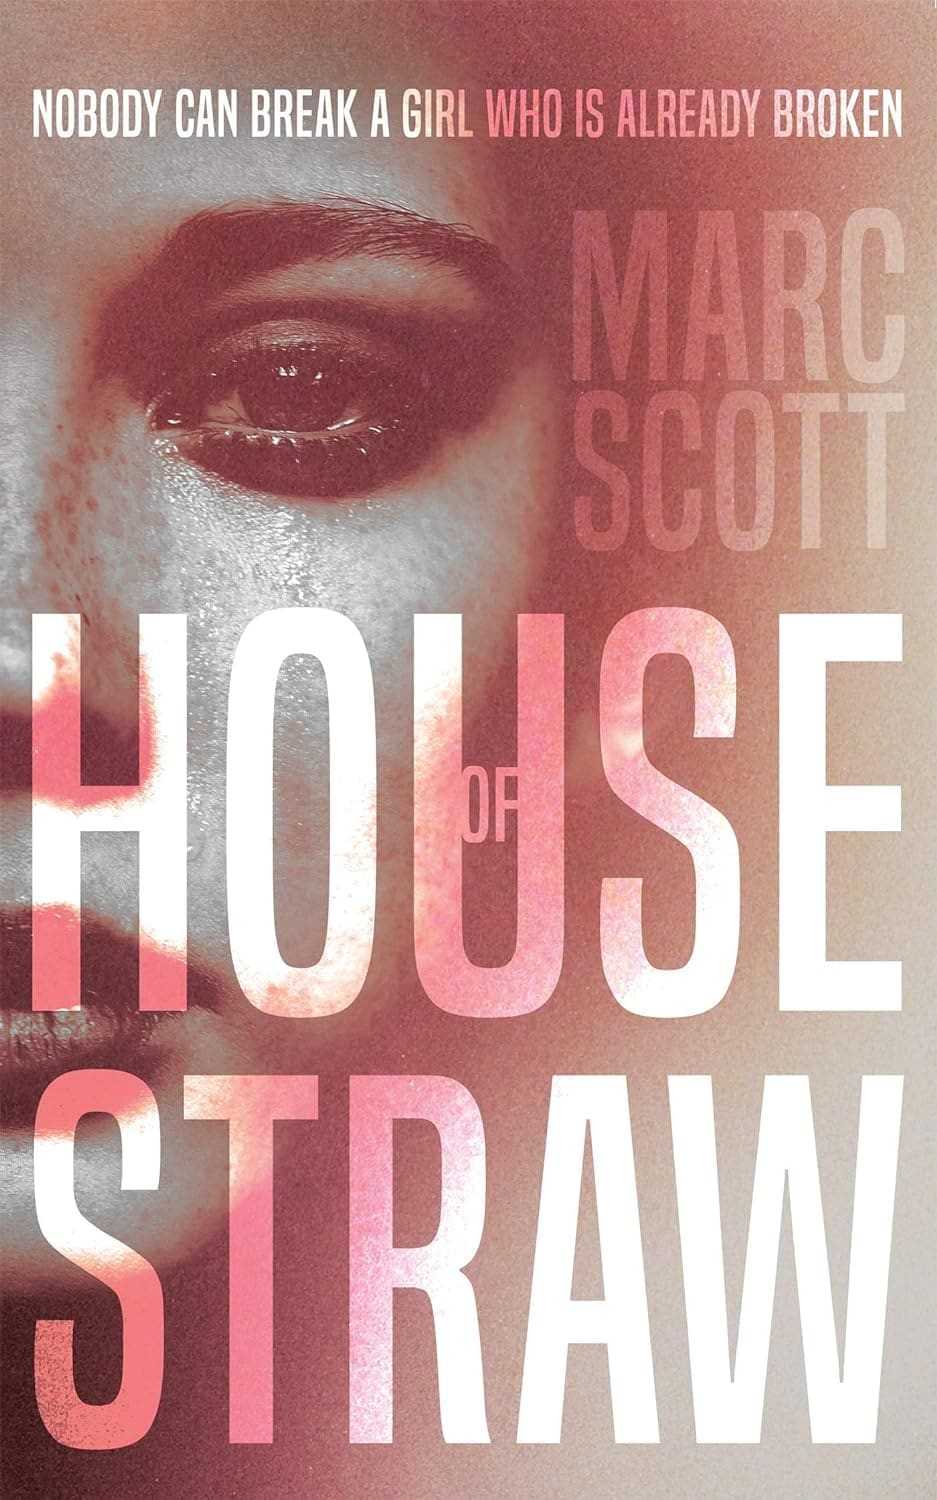 House of Straw paperback with Red Glow